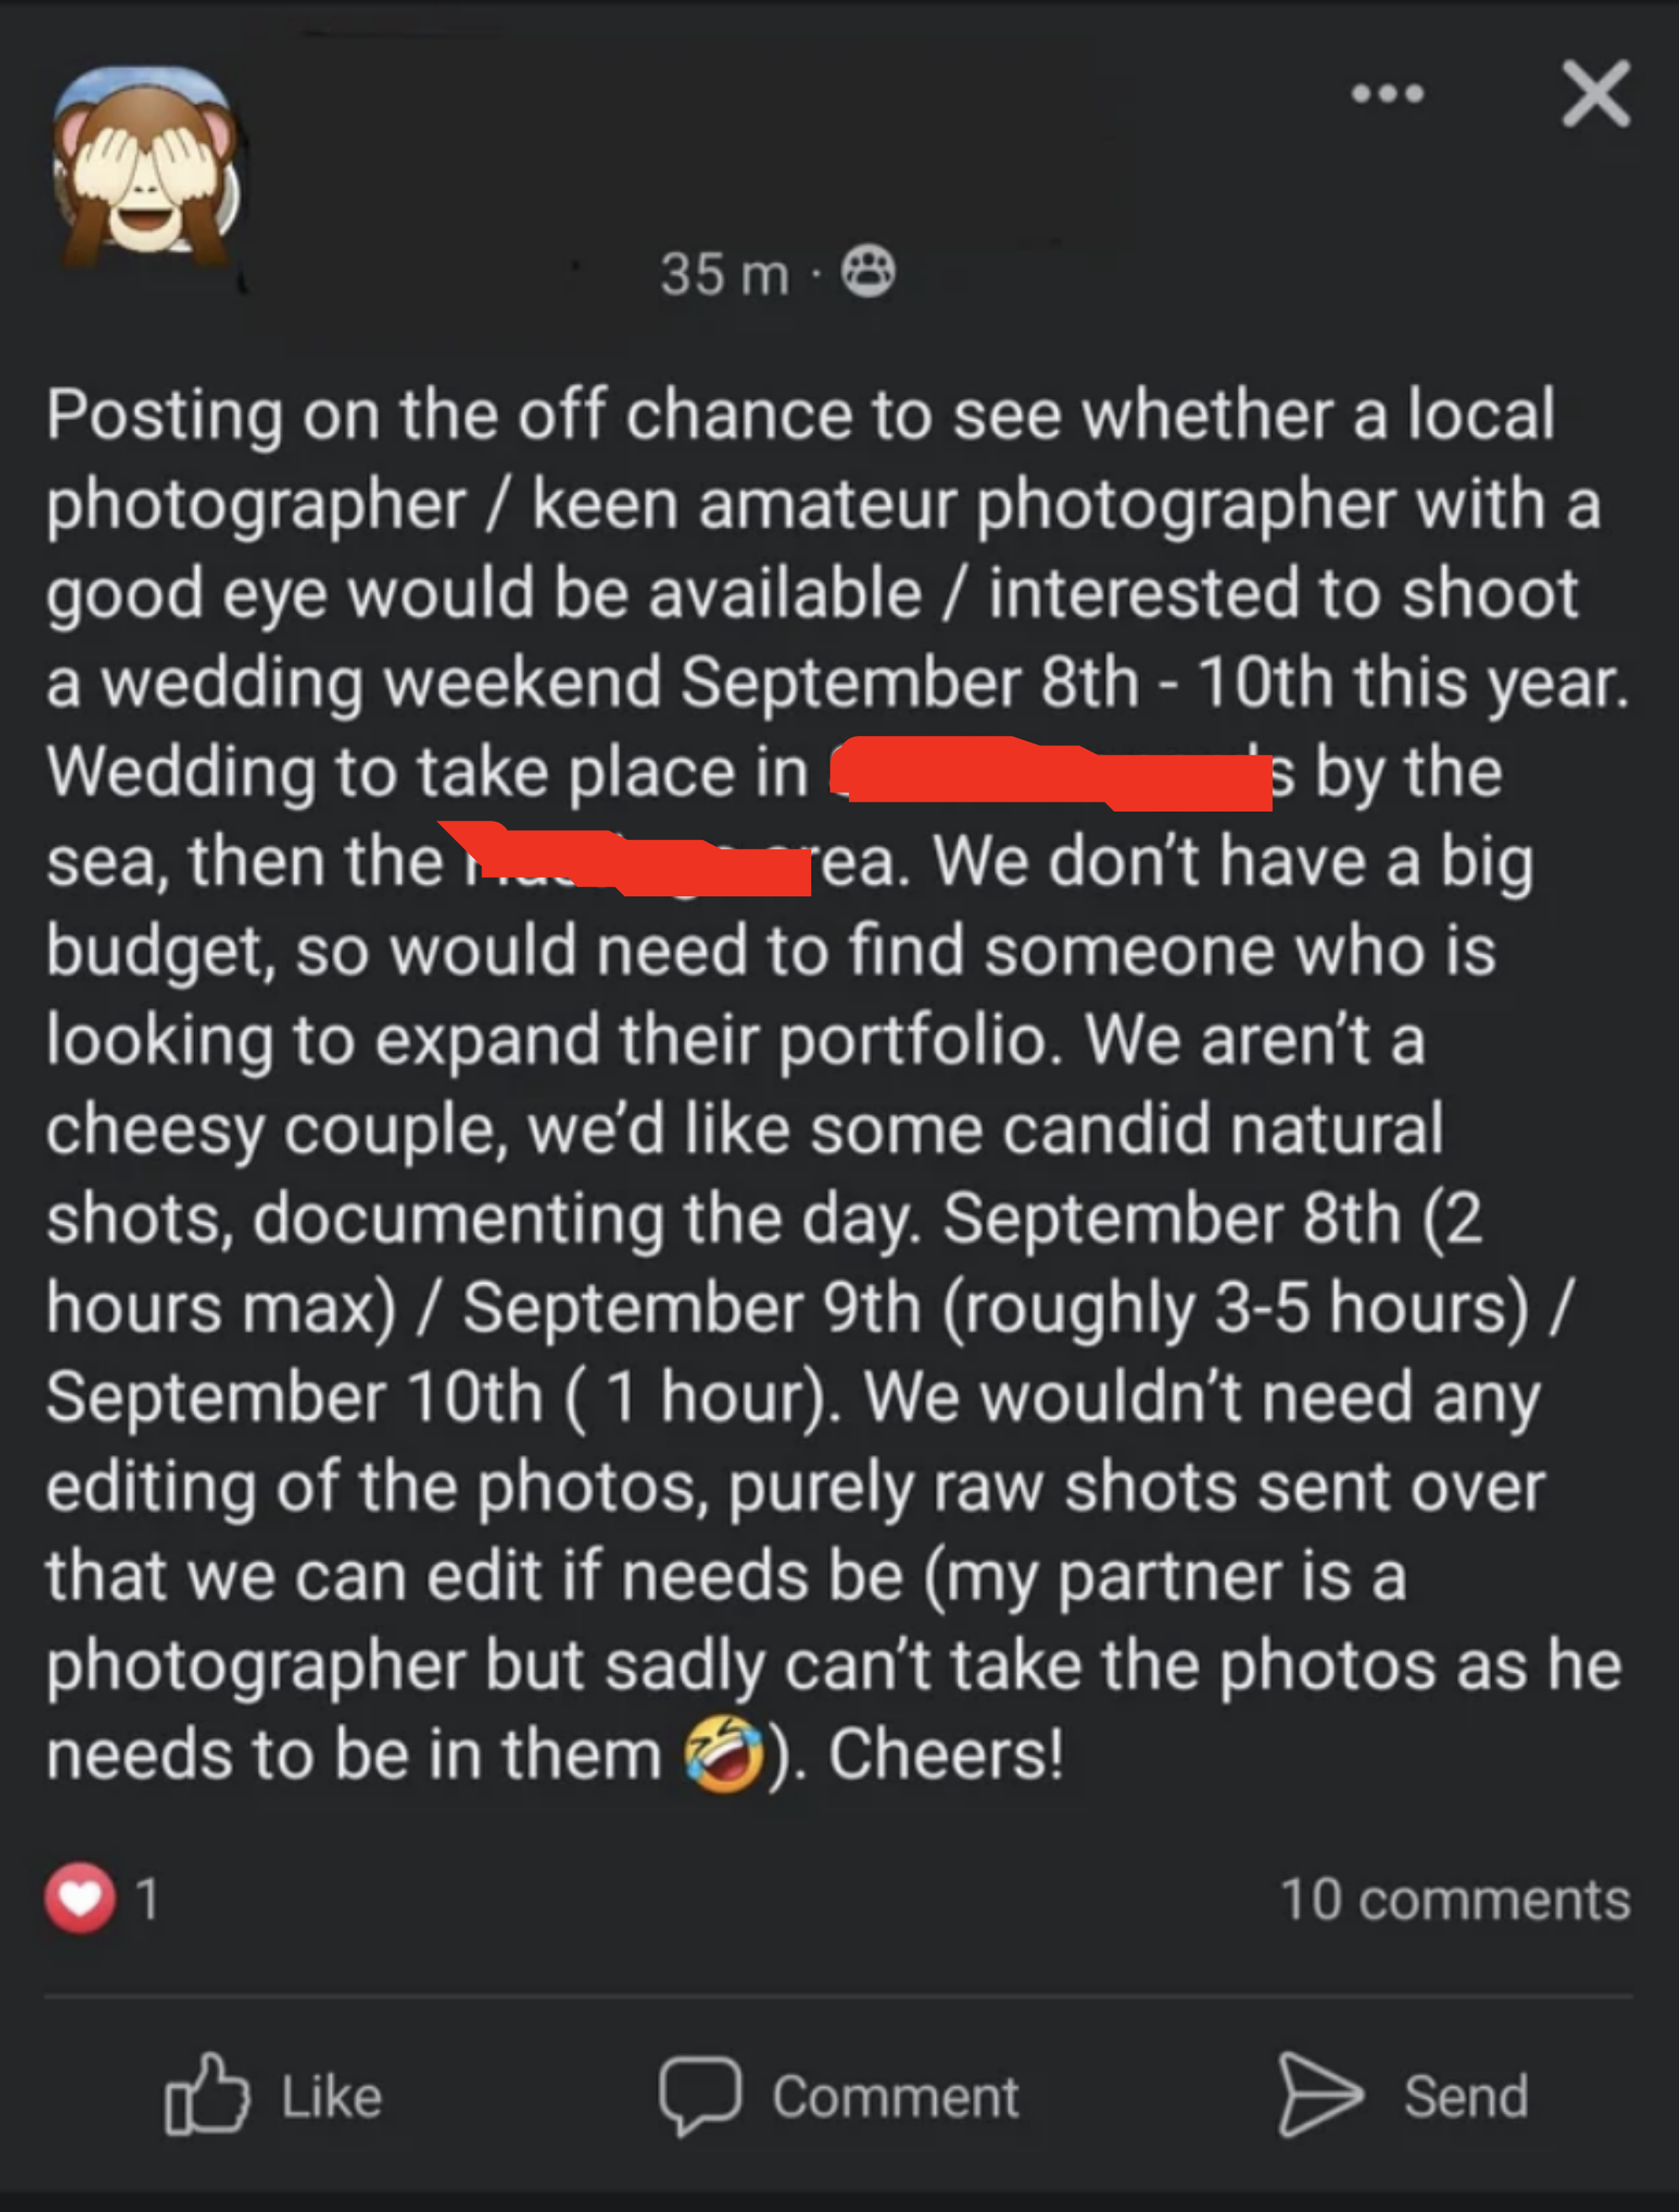 They need a photographer for &quot;some candid natural shots&quot; during a three-day wedding weekend, 1–5 hours each day; they don&#x27;t have a big budget so would need someone who&#x27;s looking to expand their portfolio; just raw shots, no editing necessary